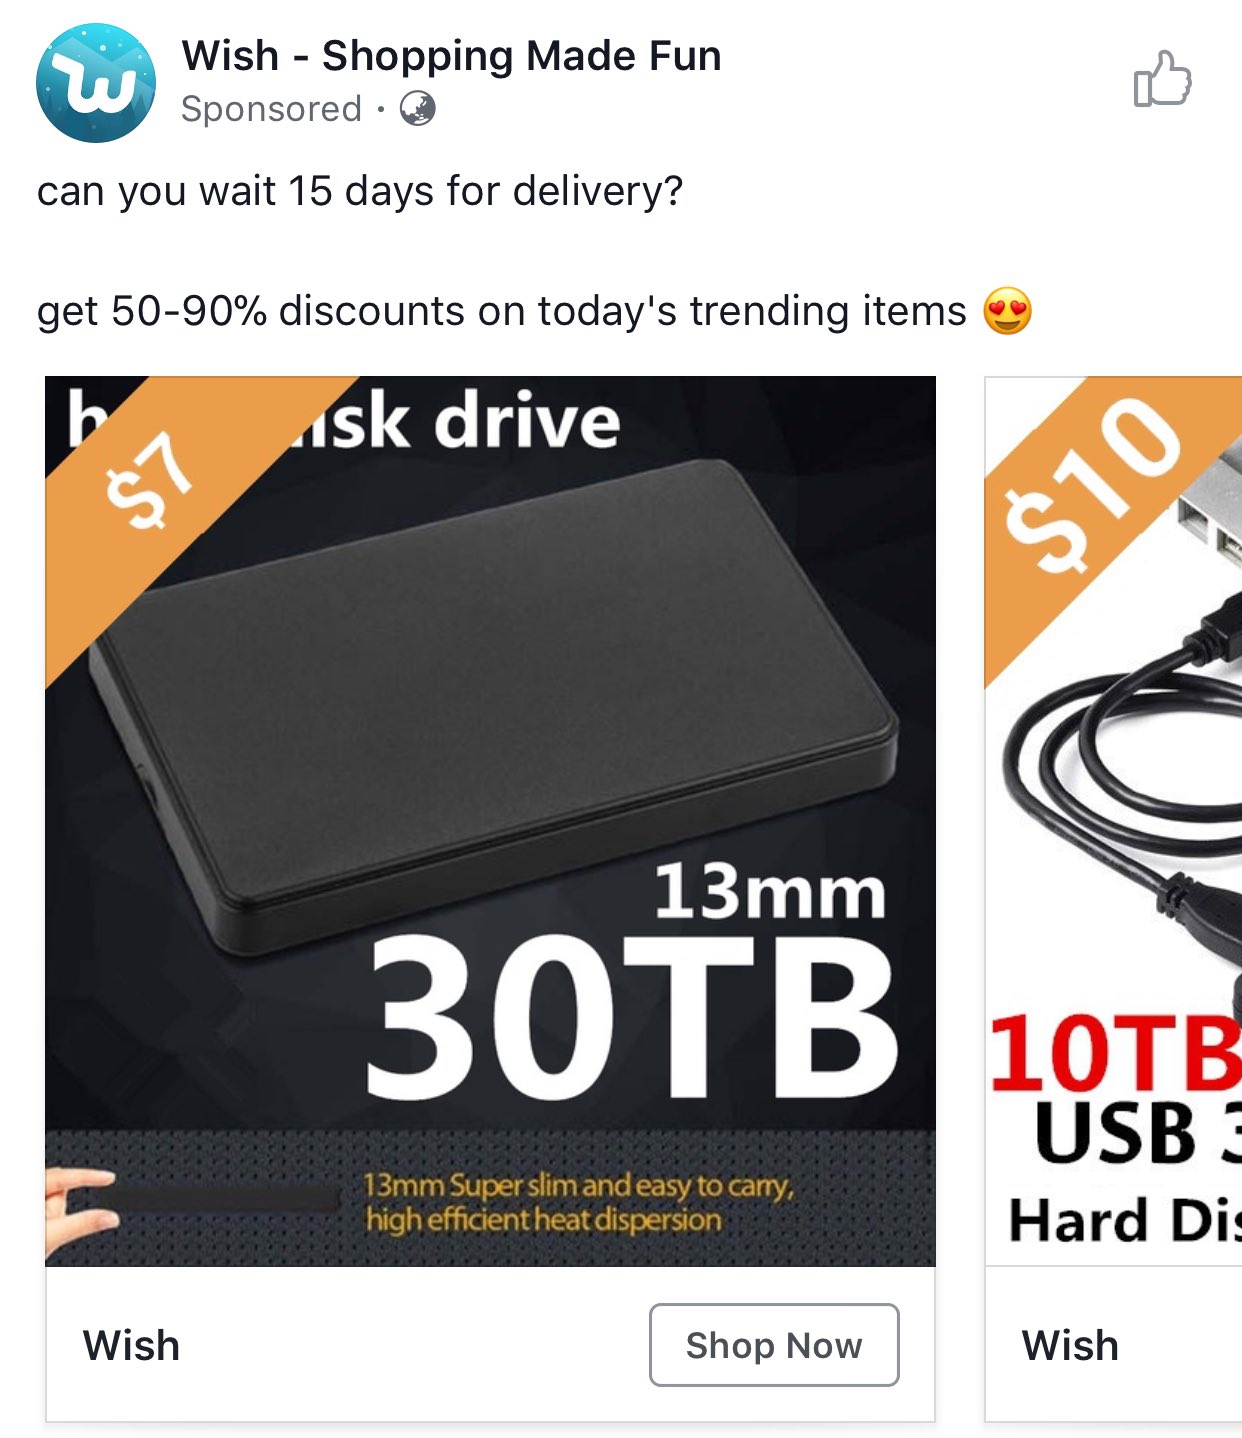 Lance McDonald on Twitter: "Hahaha this on wish for a 30TB Hard drive for is great. It's a 1TB drive. The text on the ad is an abbreviation of (